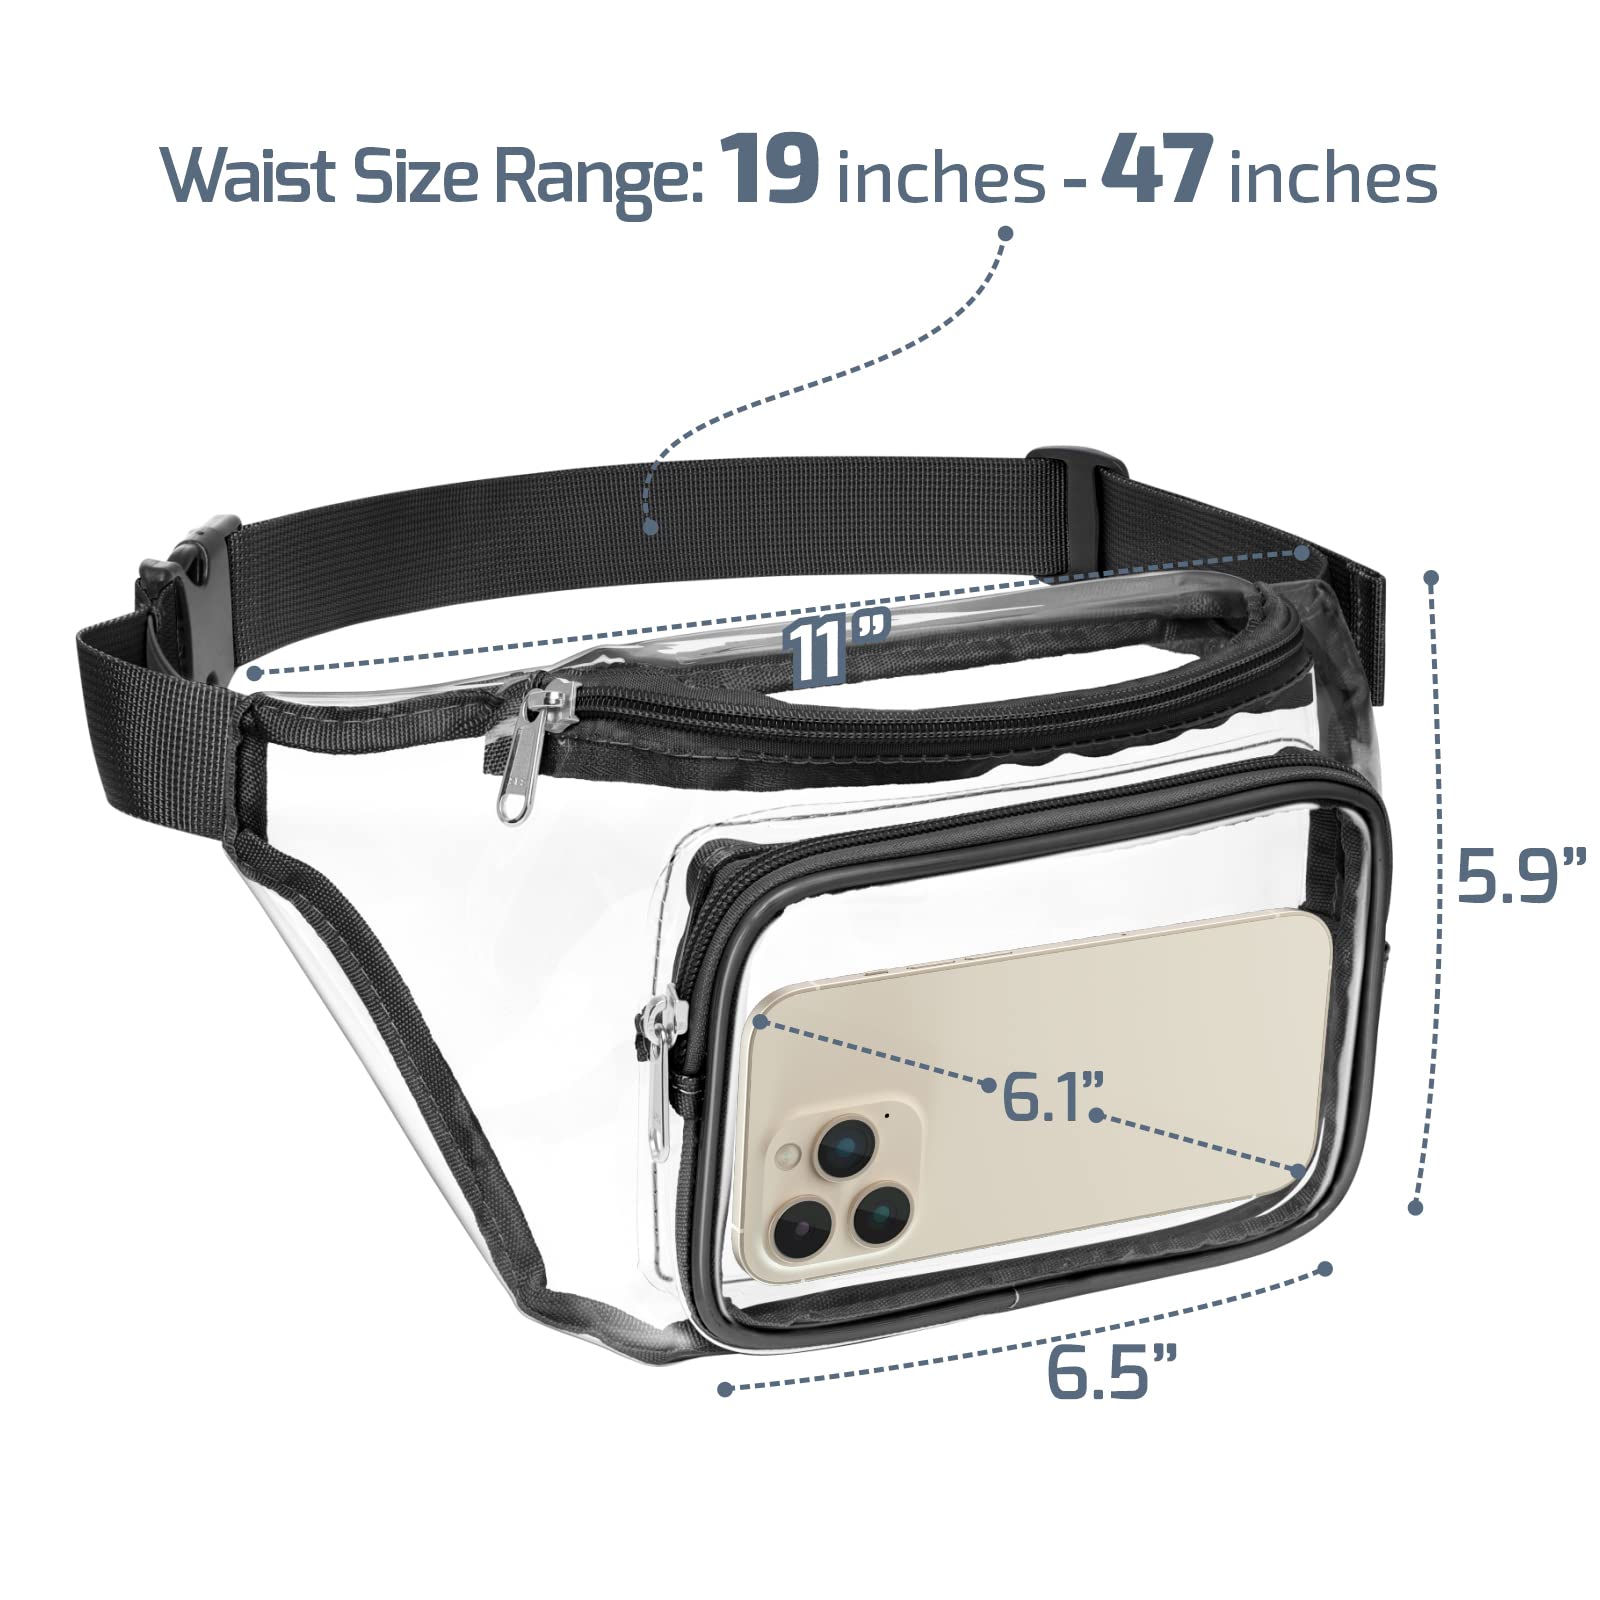 Clear Fanny Pack Stadium Approved - Veckle Fanny Packs for Women Men Water-resistant Cute Waist Bag Clear Purse Transparent Adjustable Belt Bag for Sports, Travel, Beach, Events, Concerts Bag, Black